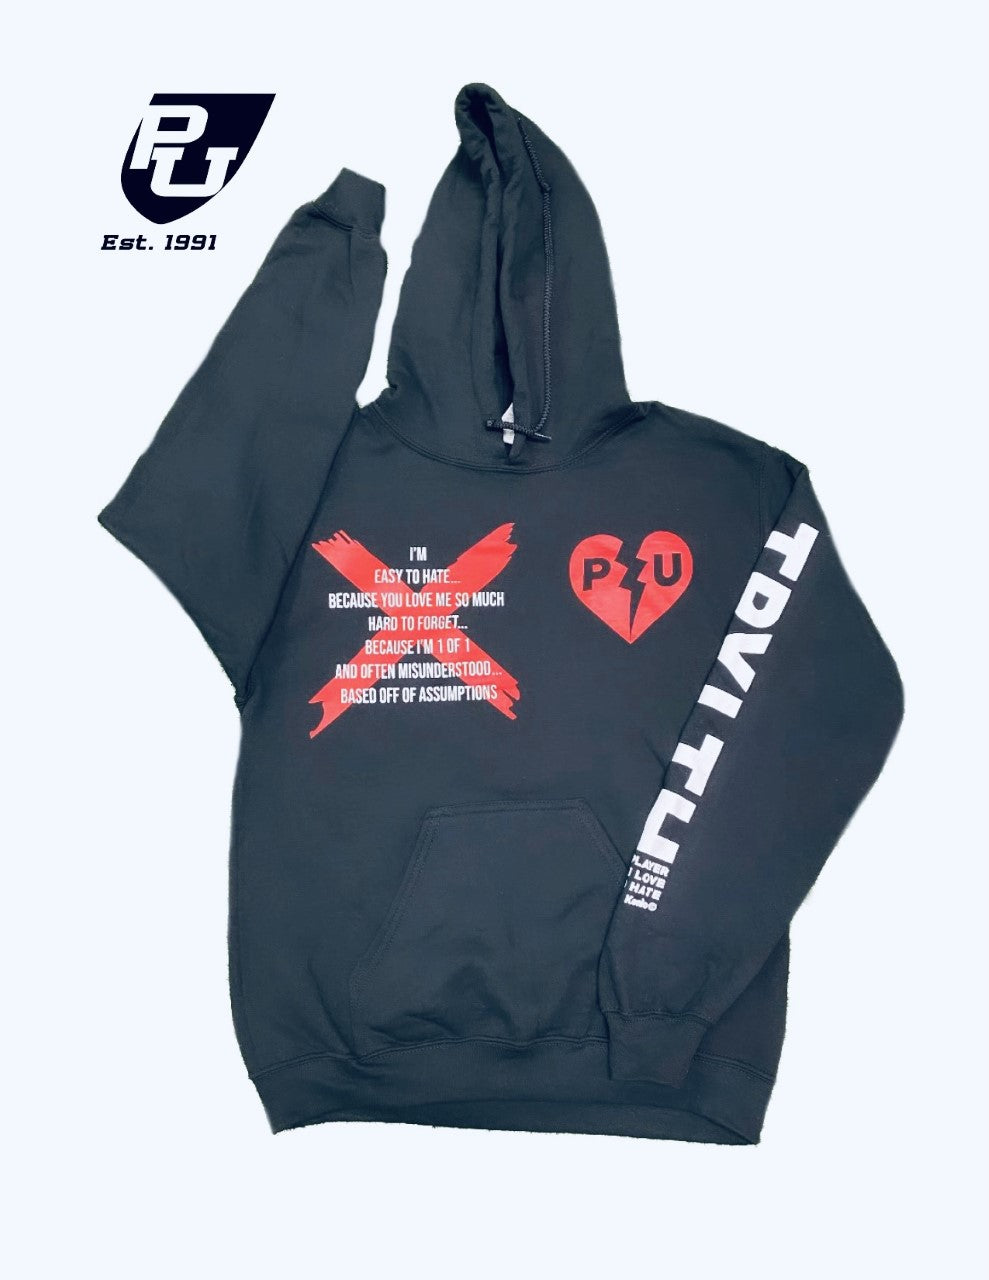 THE PLAYER YOU LOVE TO HATE BLACK HEART HOODIE